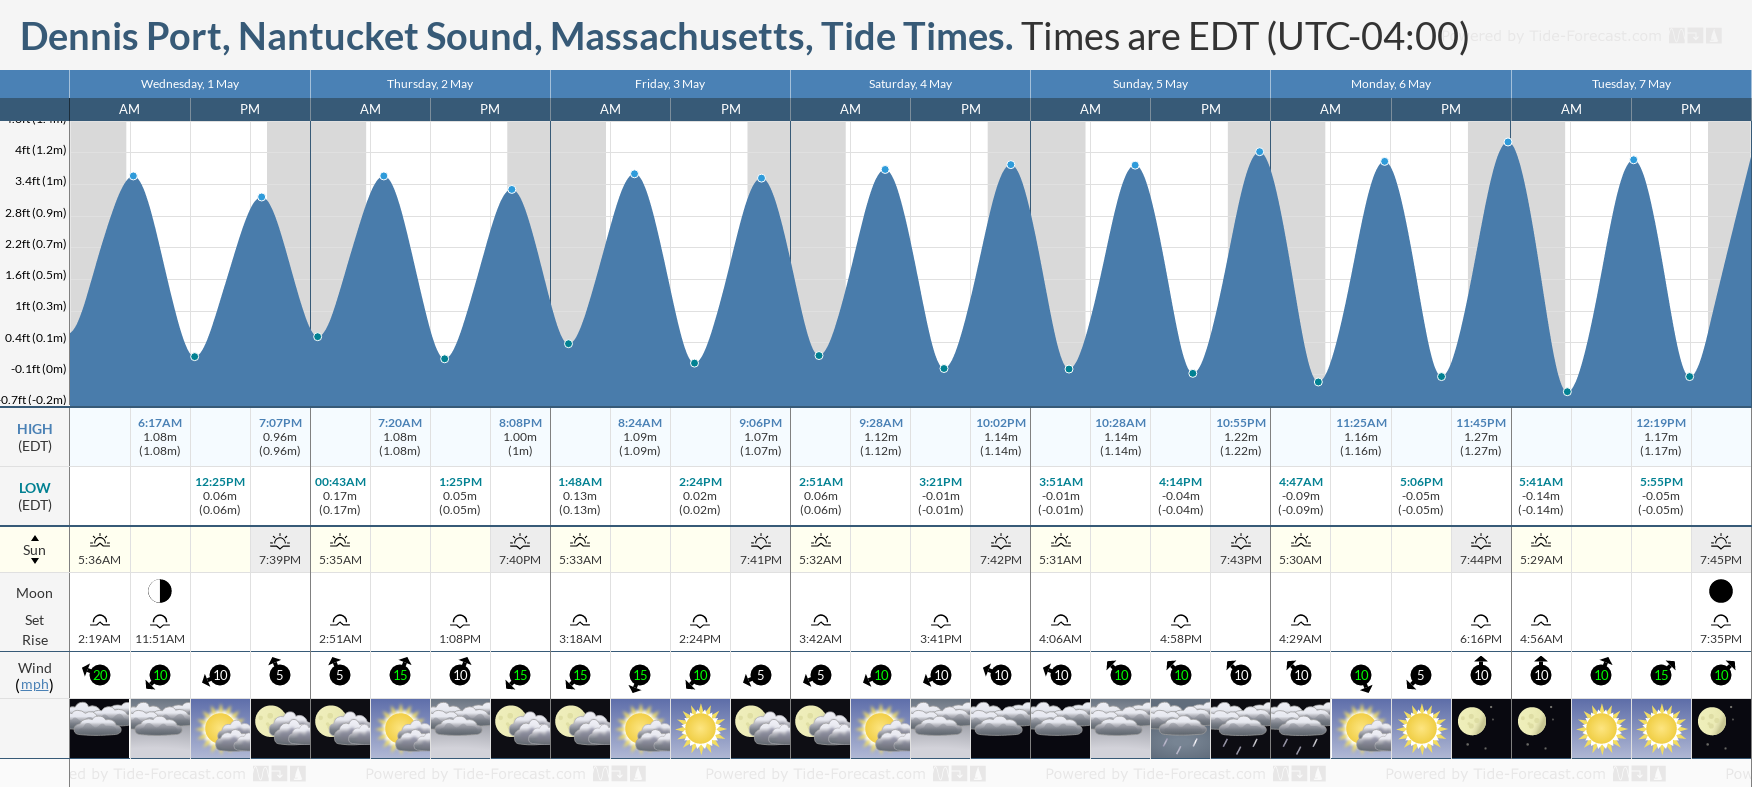 Dennis Port, Nantucket Sound, Massachusetts Tide Chart including high and low tide tide times for the next 7 days